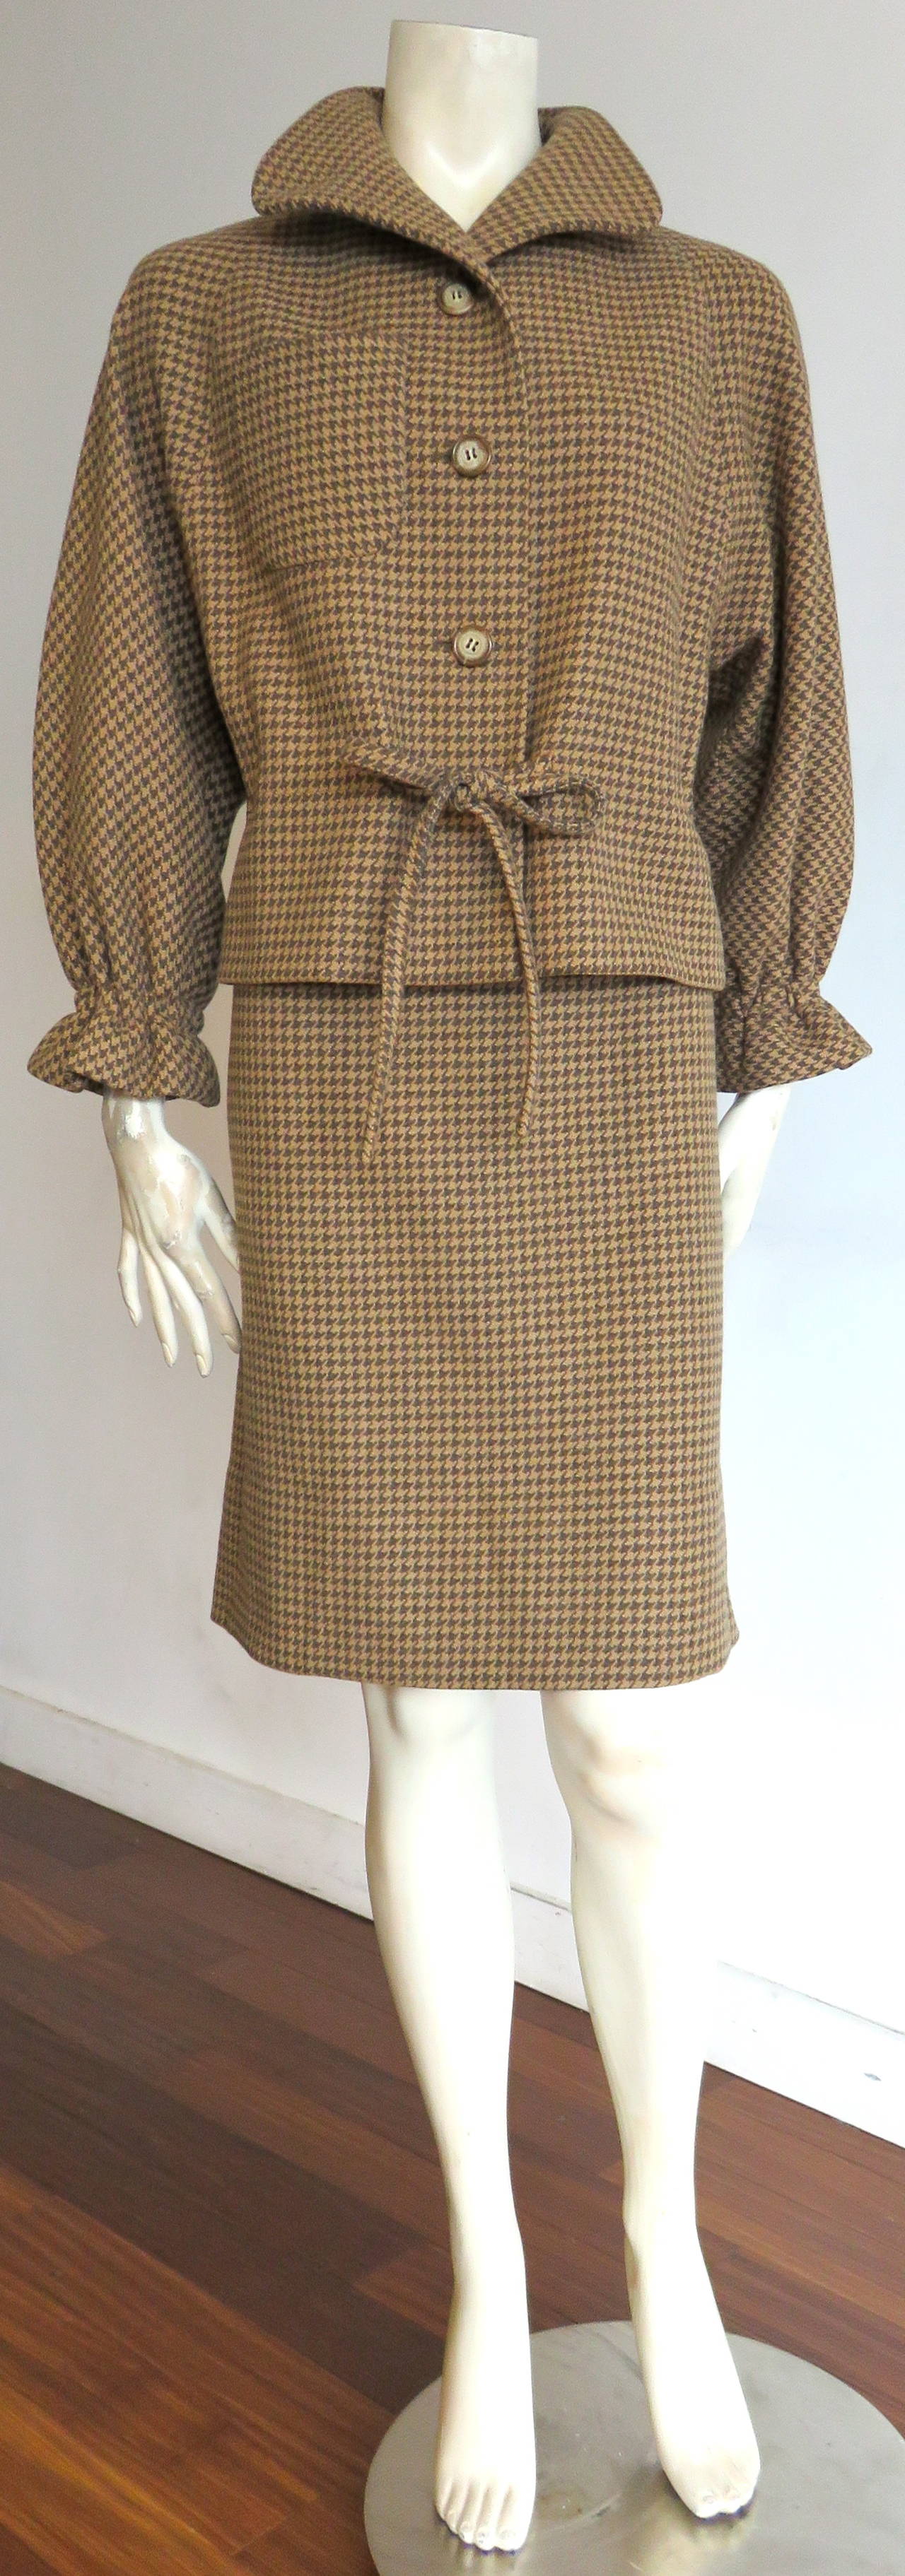 Excellent condition, early 1960's, PIERRE CARDIN PARIS wool houndstooth skirt suit.

This wonderful skirt suit features a lovely, tie-front jacket with volume shape sleeves, and flared, ruffle cuffs.  The jacket feats a patch pocket at the right